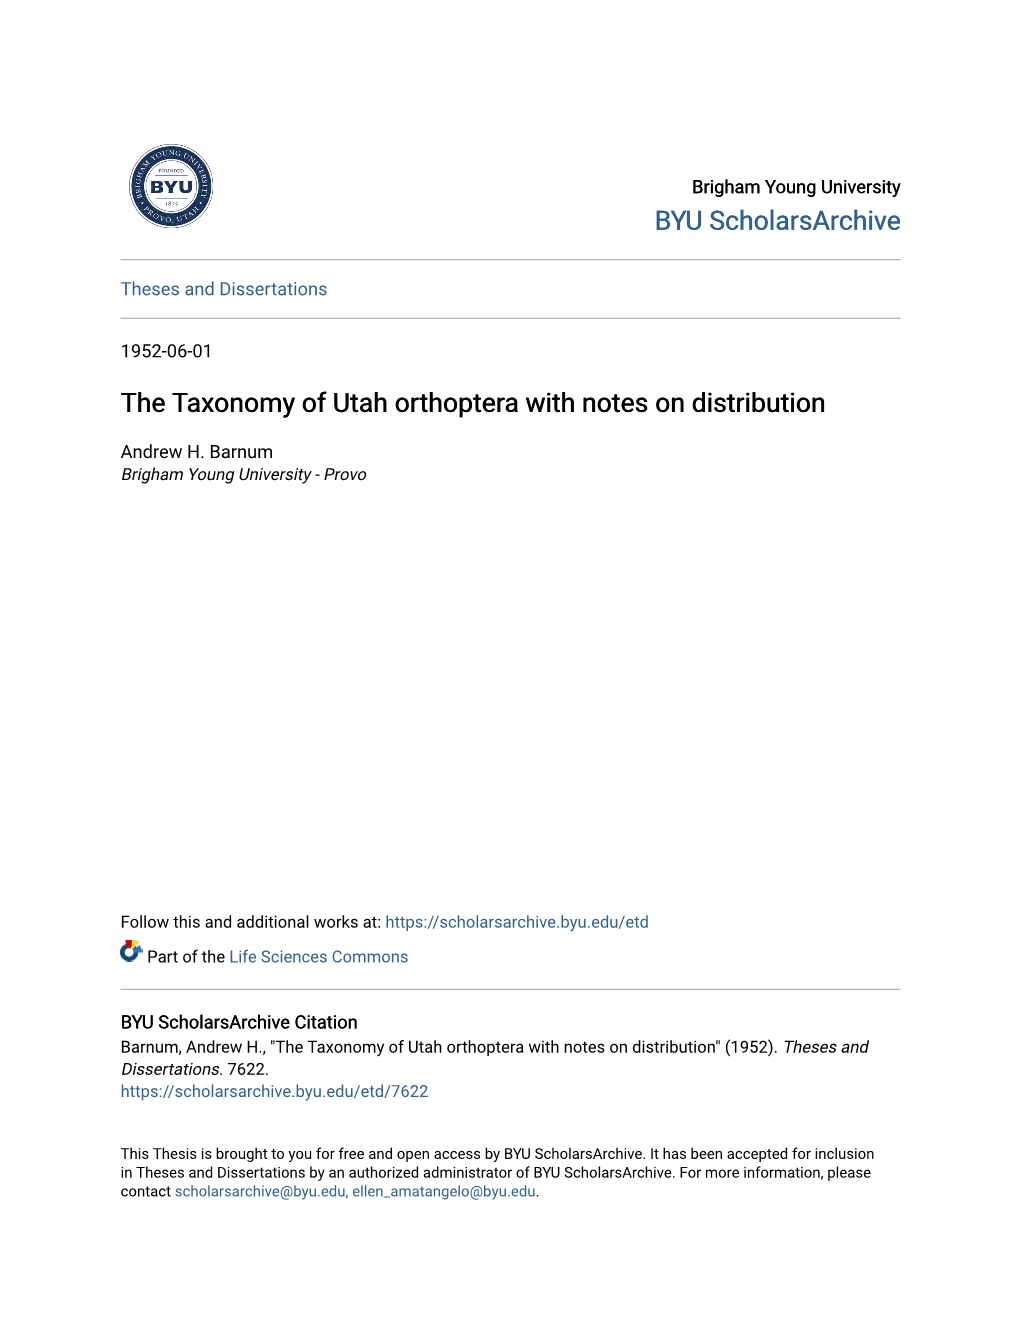 The Taxonomy of Utah Orthoptera with Notes on Distribution